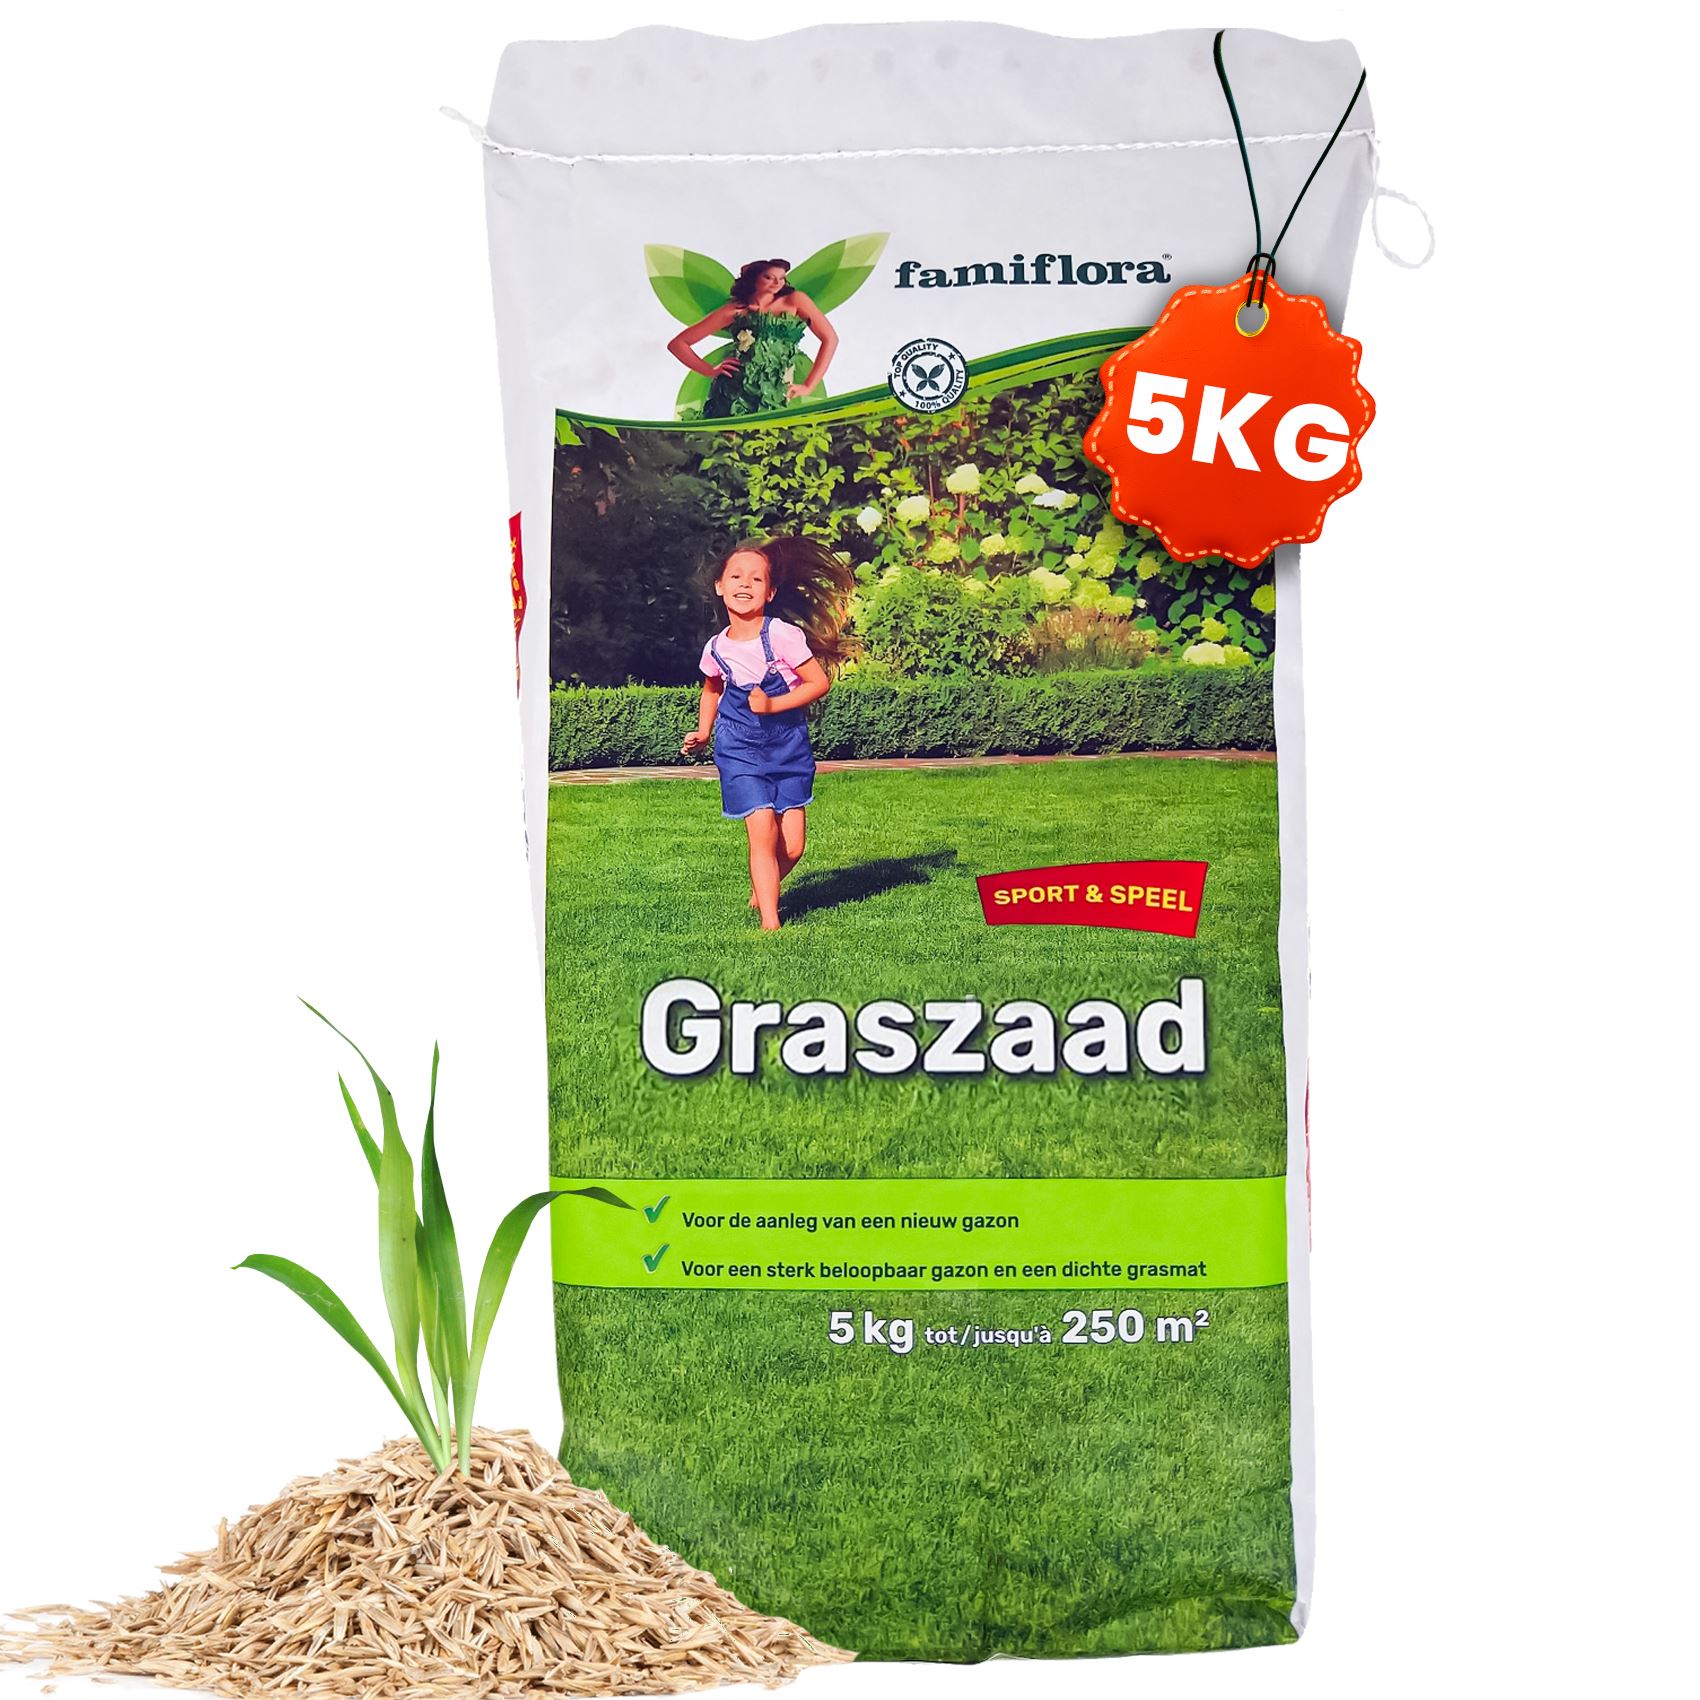 Famiflora grass seed play & sport 5 kg (up to 250 m²)